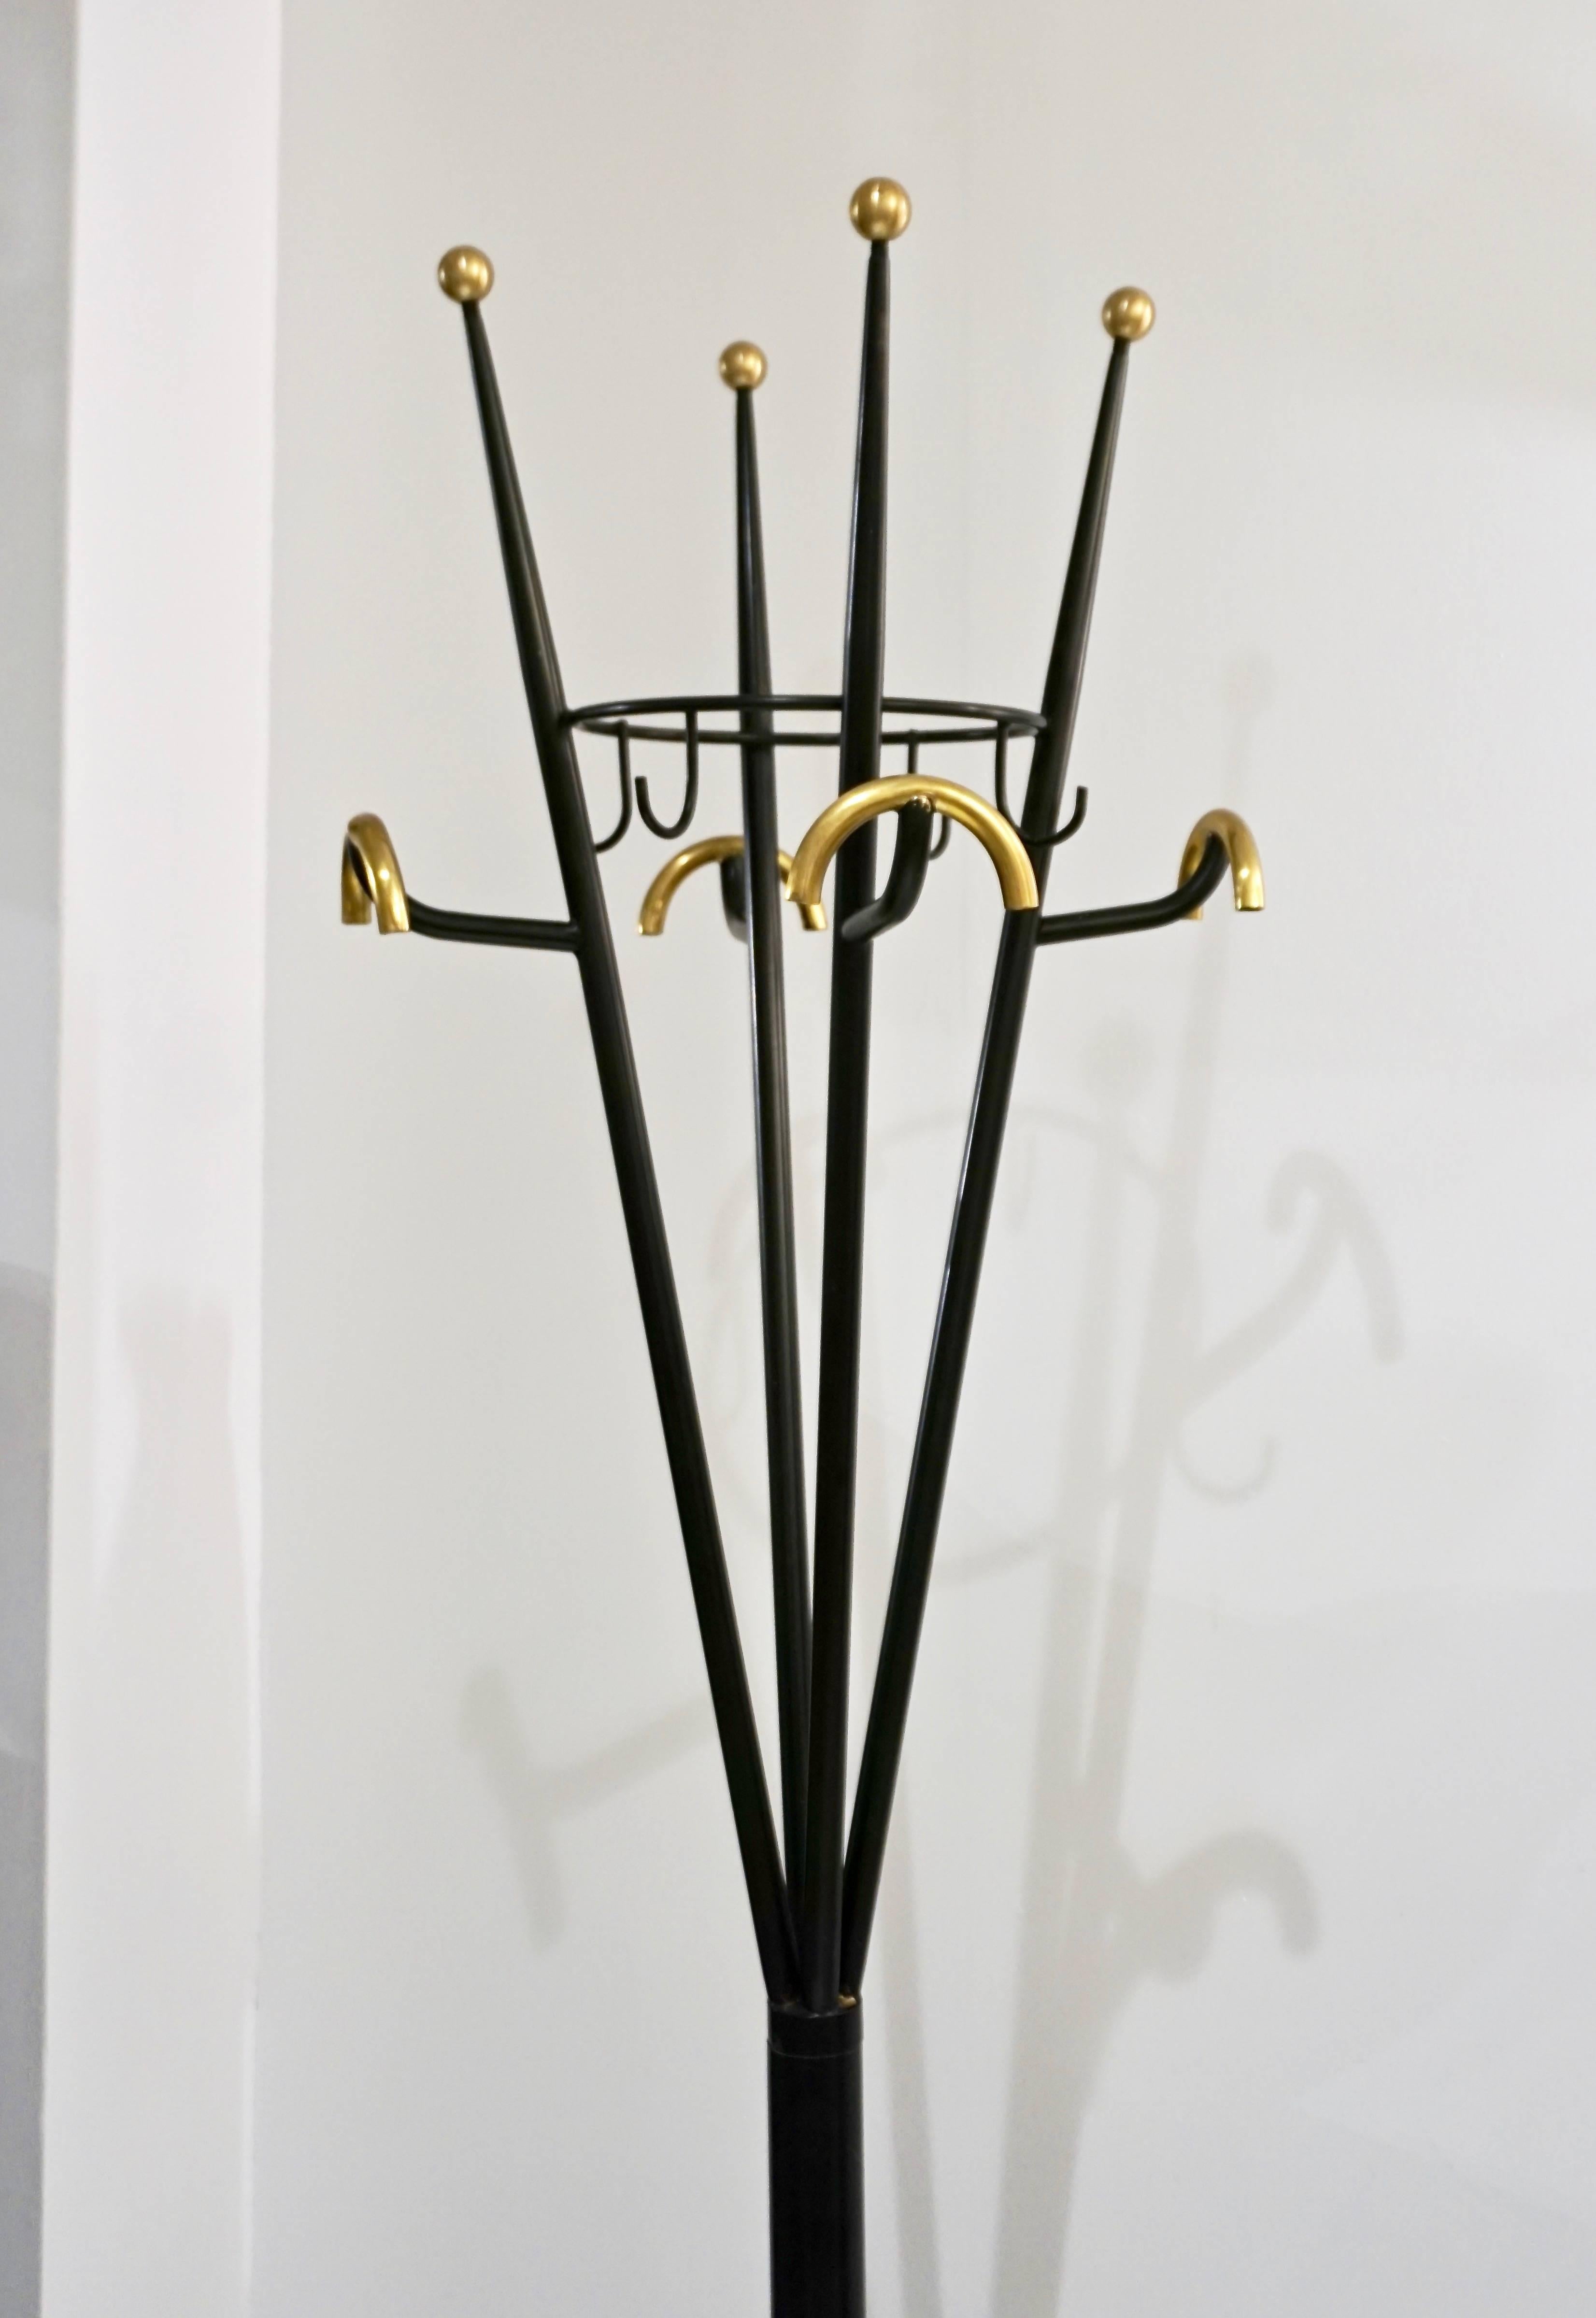 Very practical and highly decorative 1980s Italian coatrack/hat hanger and umbrella stand with one-of-a-kind streamlined design. Entirely handcrafted in black lacquered metal highlighted with brass details, it features four umbrella holders with a